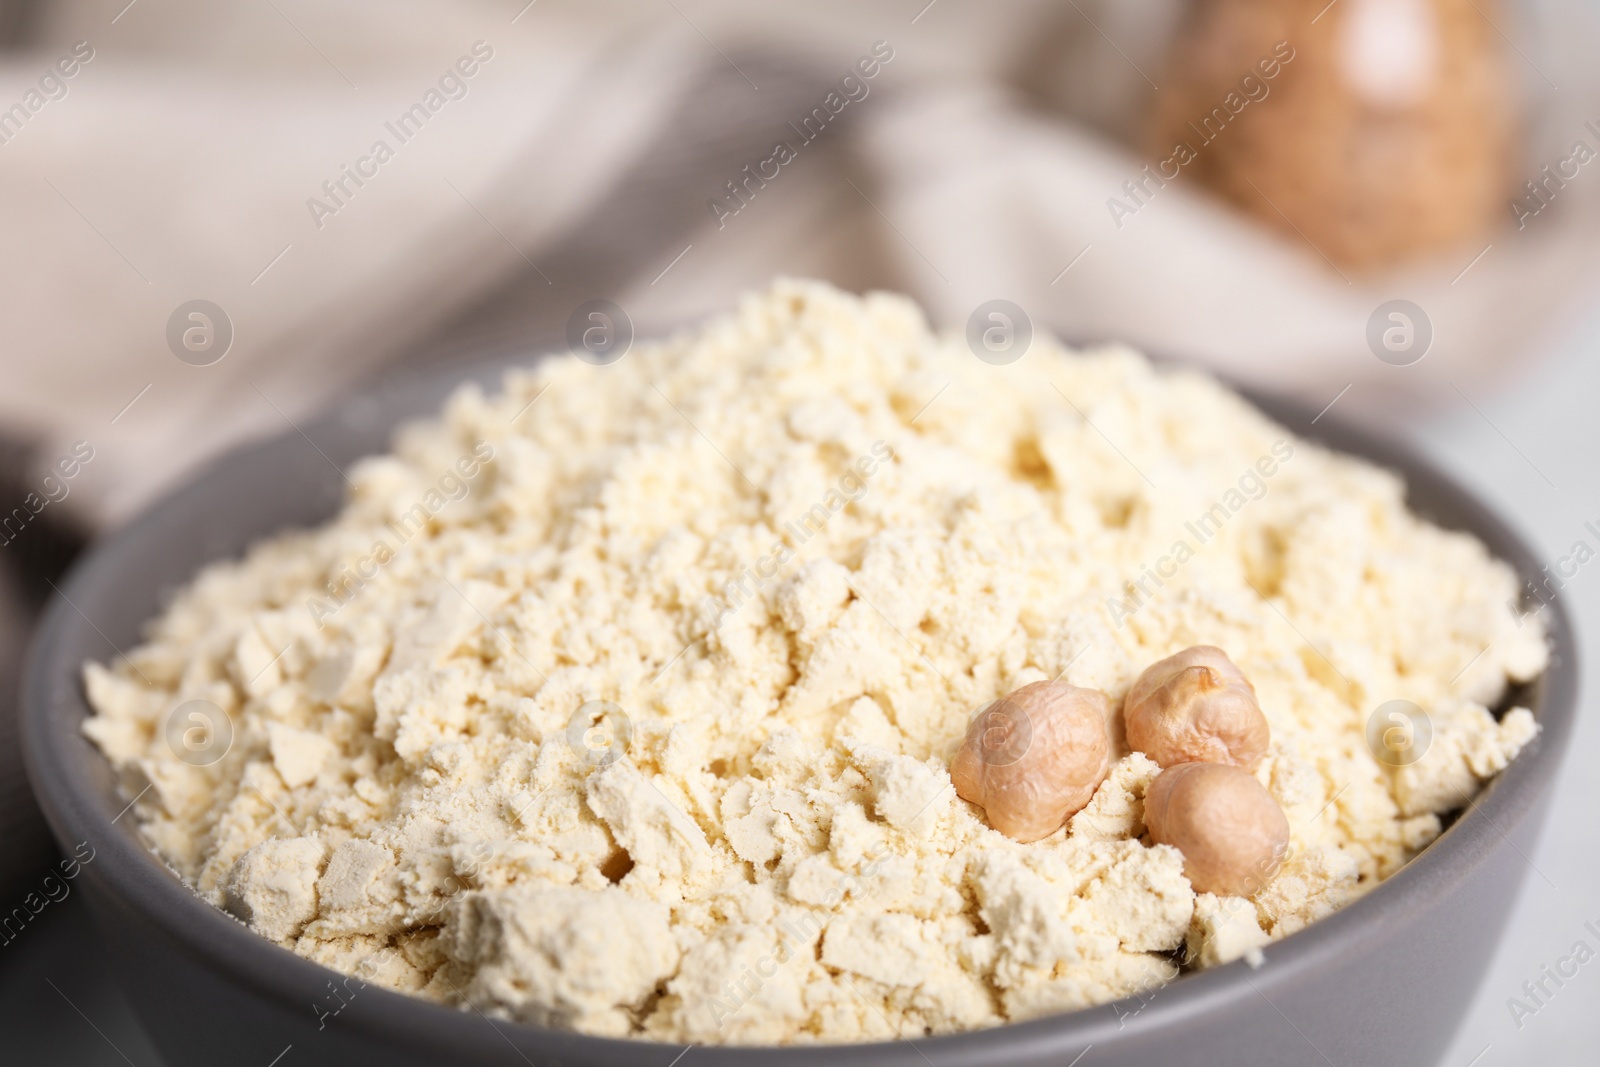 Photo of Chickpea flour and seeds in bowl, closeup